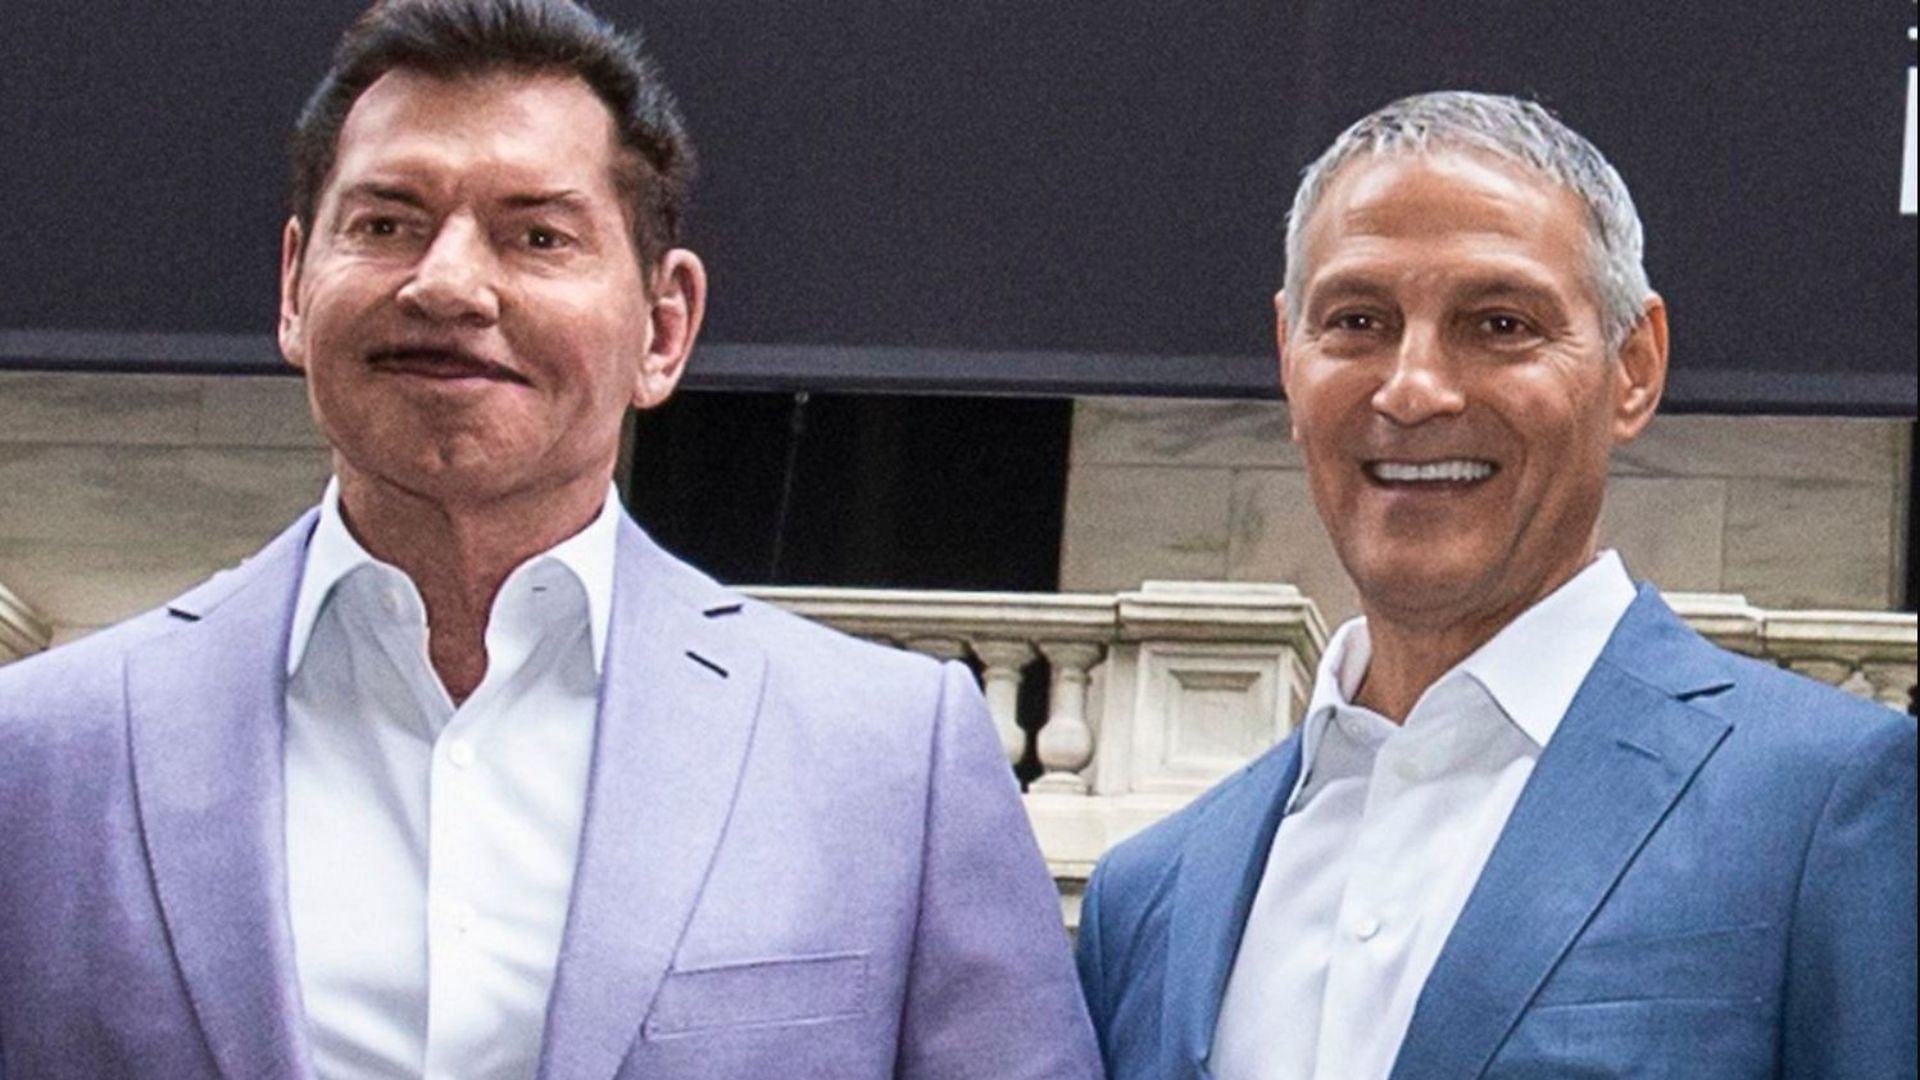 Ari Emanuel and Vince McMahon during the UFC-WWE merger on September 12, 2023